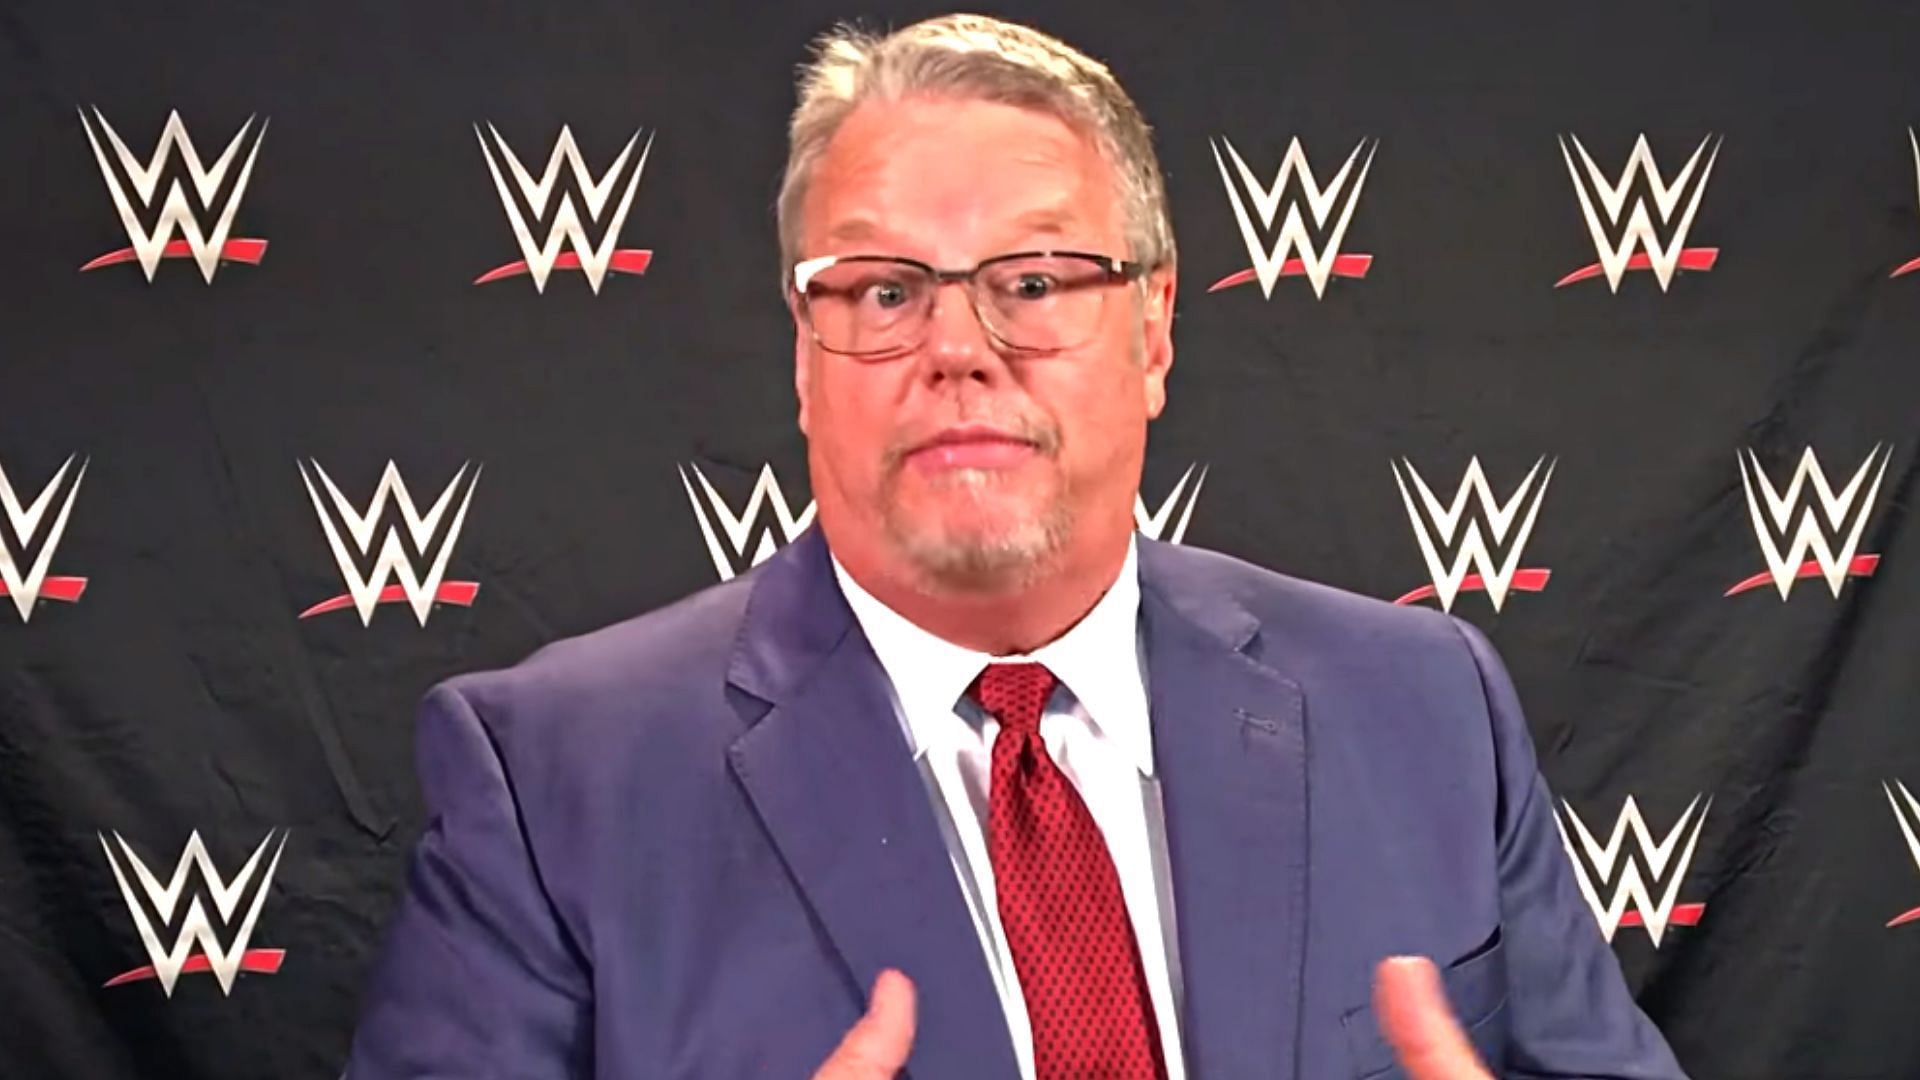 Bruce Prichard broke his silence on missing recent WWE shows.